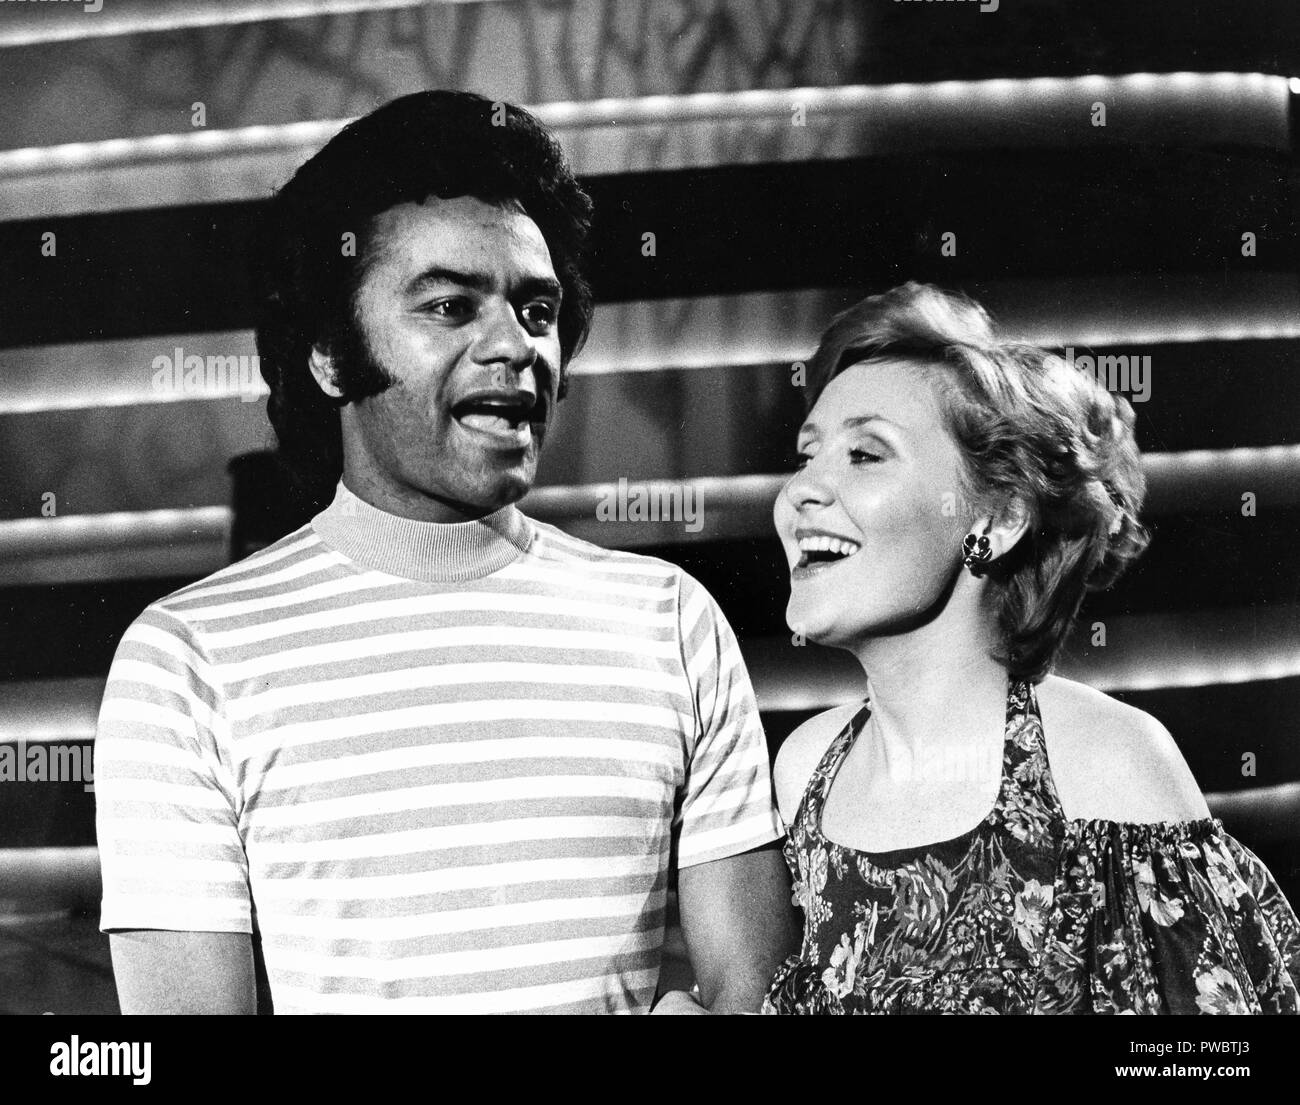 lulu kennedy cairns, johnny mathis, 60s Stock Photo